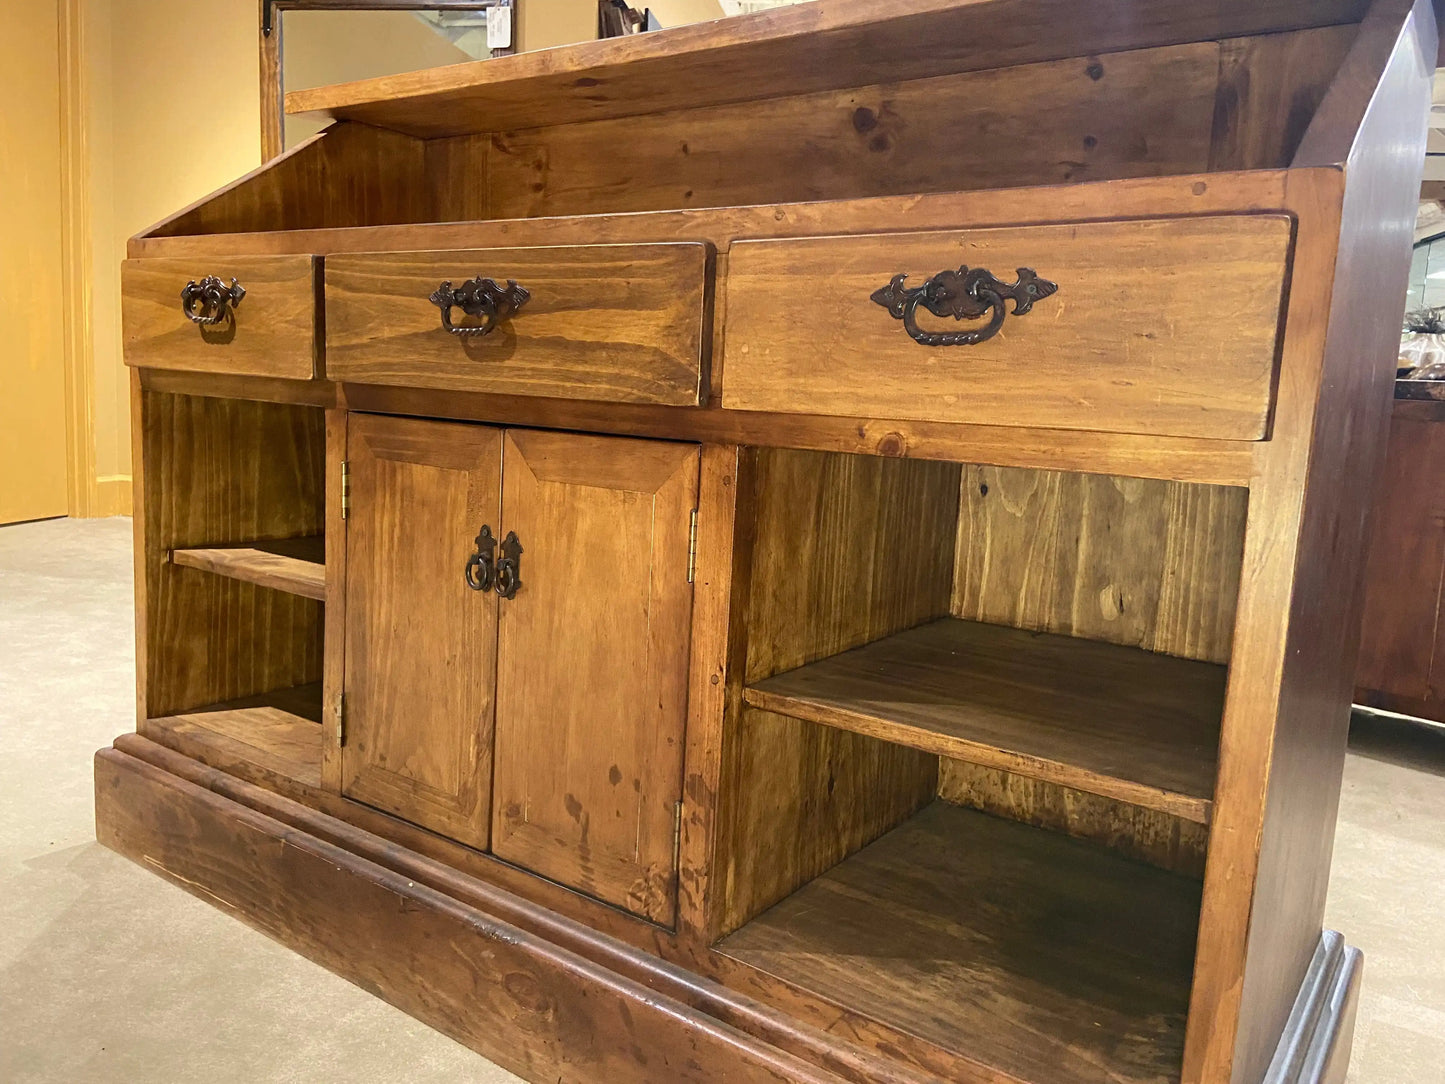 Back of Bar with the drawers closed showing depth shelf spaces